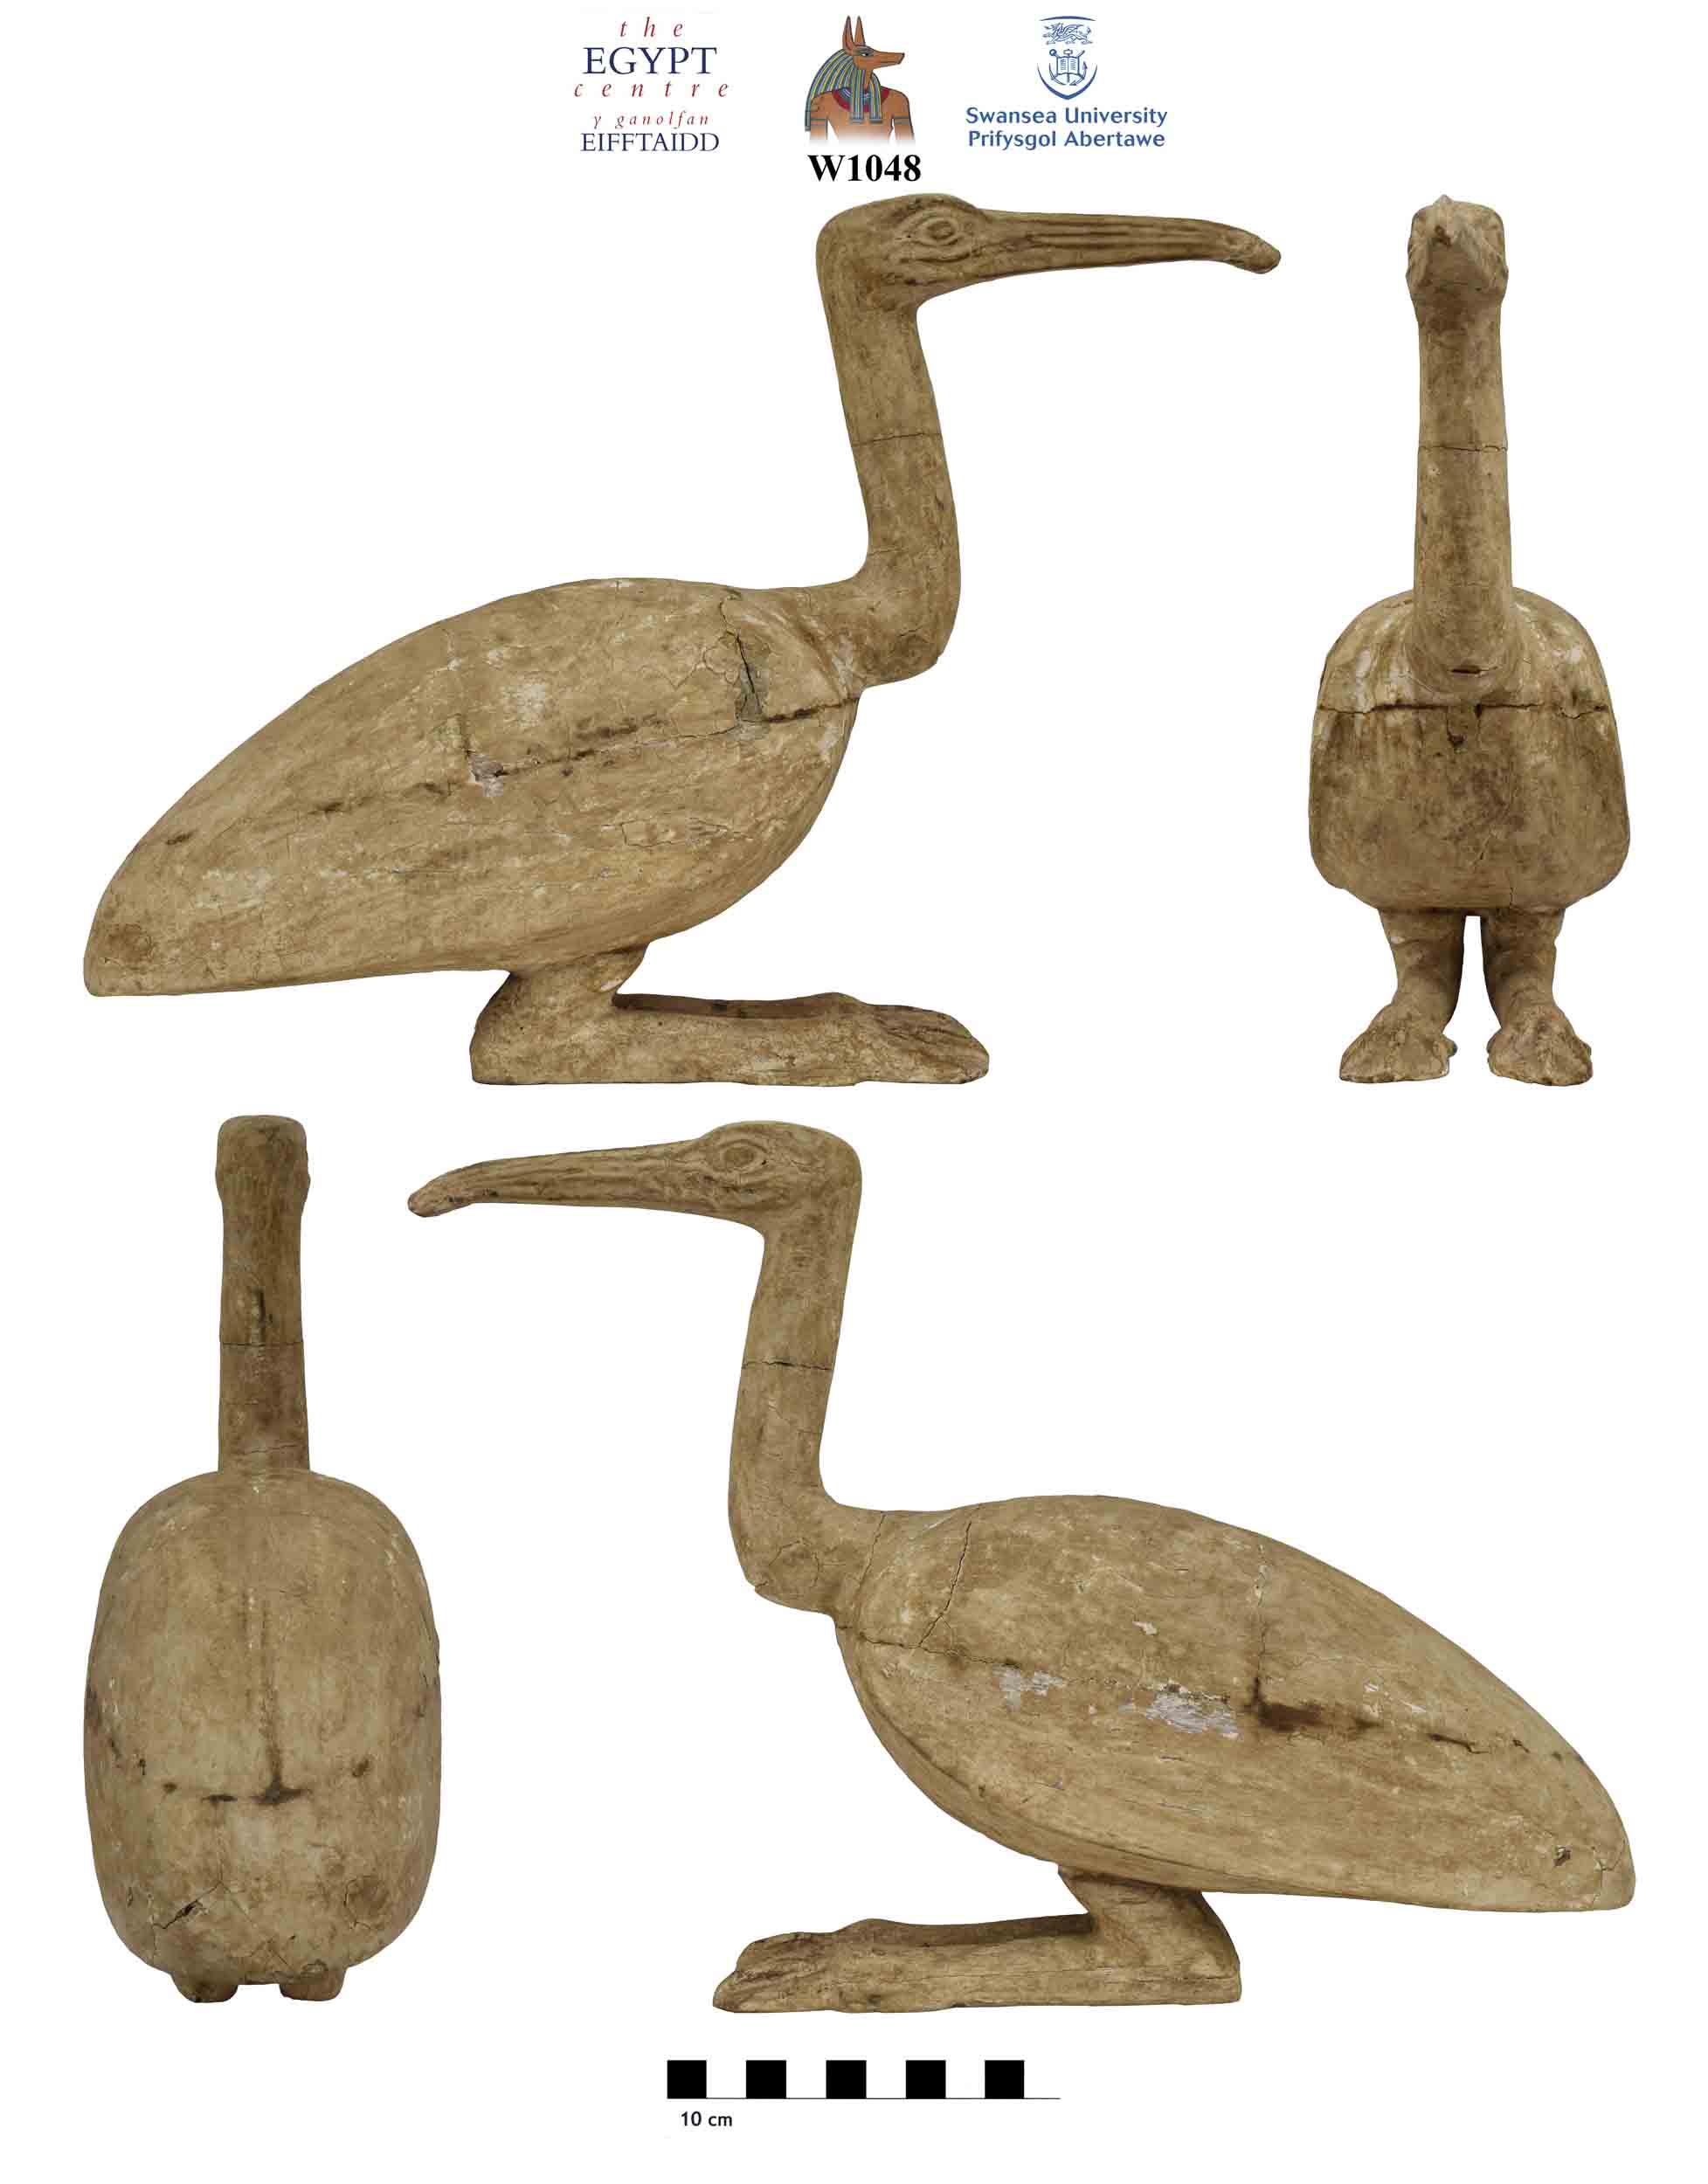 Image for: Statue of an ibis